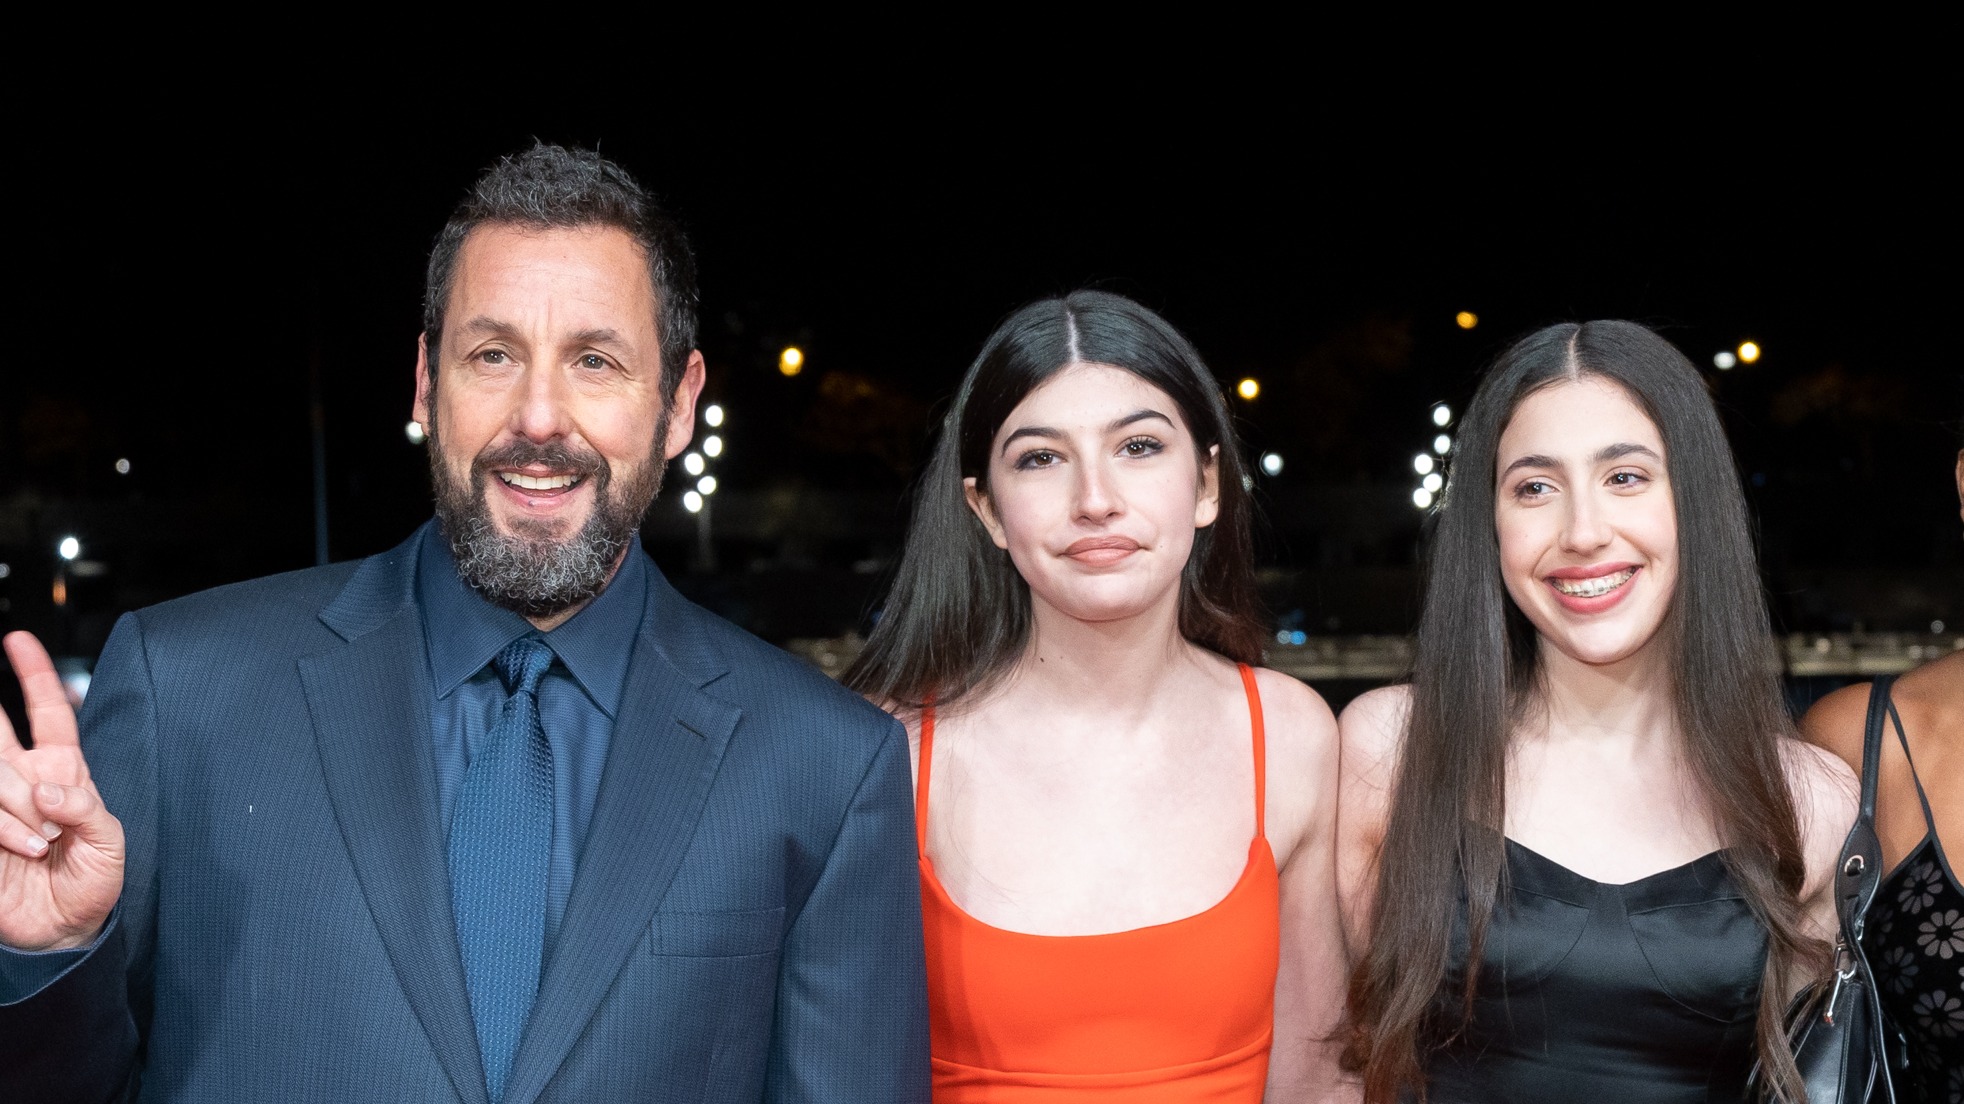 Adam Sandlers Teenage Daughters Are All Grown-Up in New Film With Their Dad